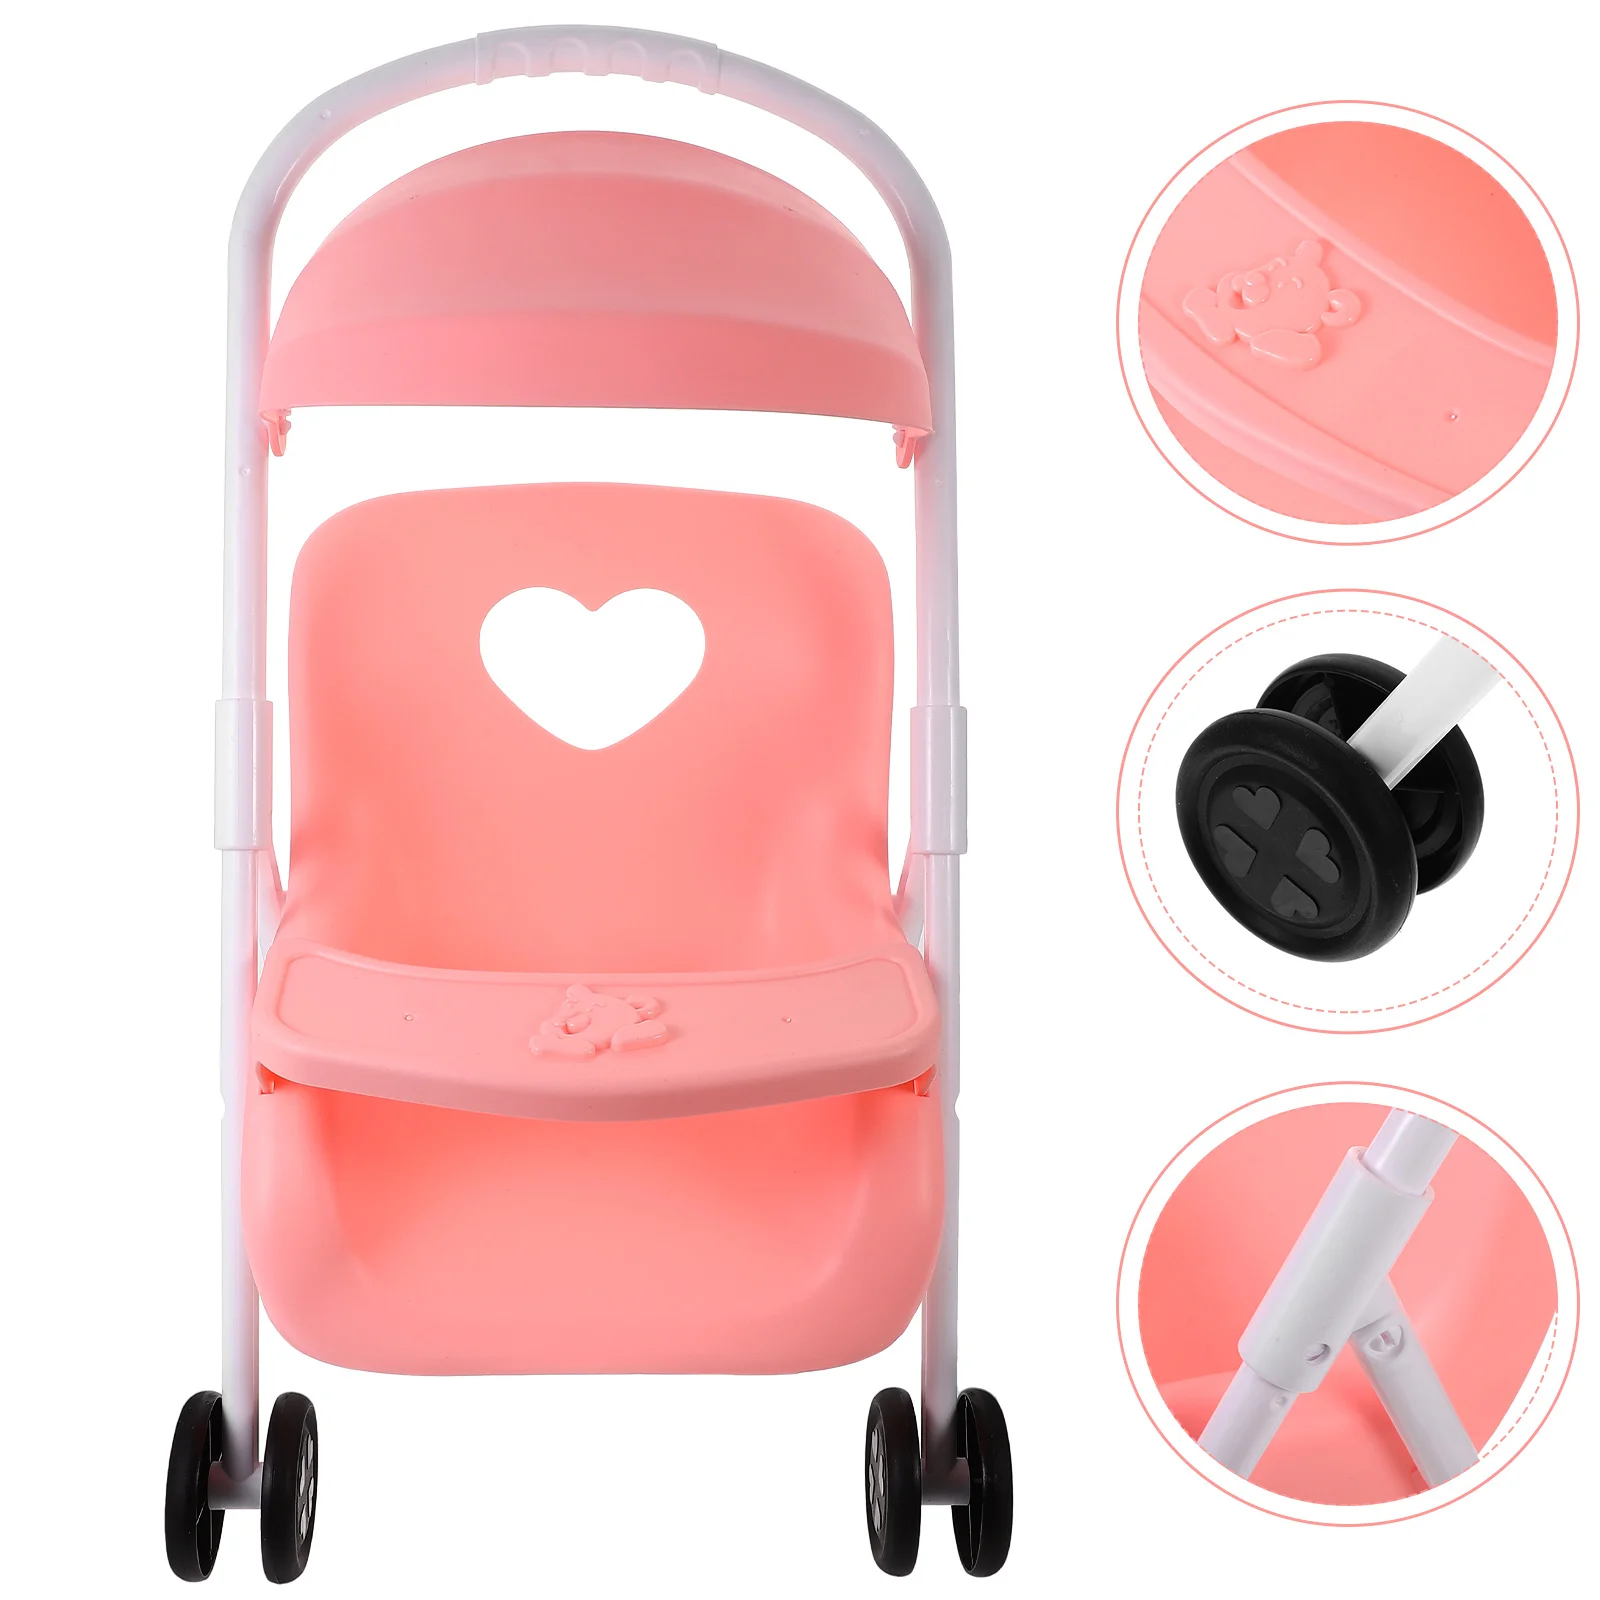 Doll Stroller Play Game Doll Stroller Simulated Play Game Stroller Furniture Adornment Children Role Playing Game for Dollhouse 6v 7ah double drive support 25kg old children electric remote control toy car four stroller baby can drive